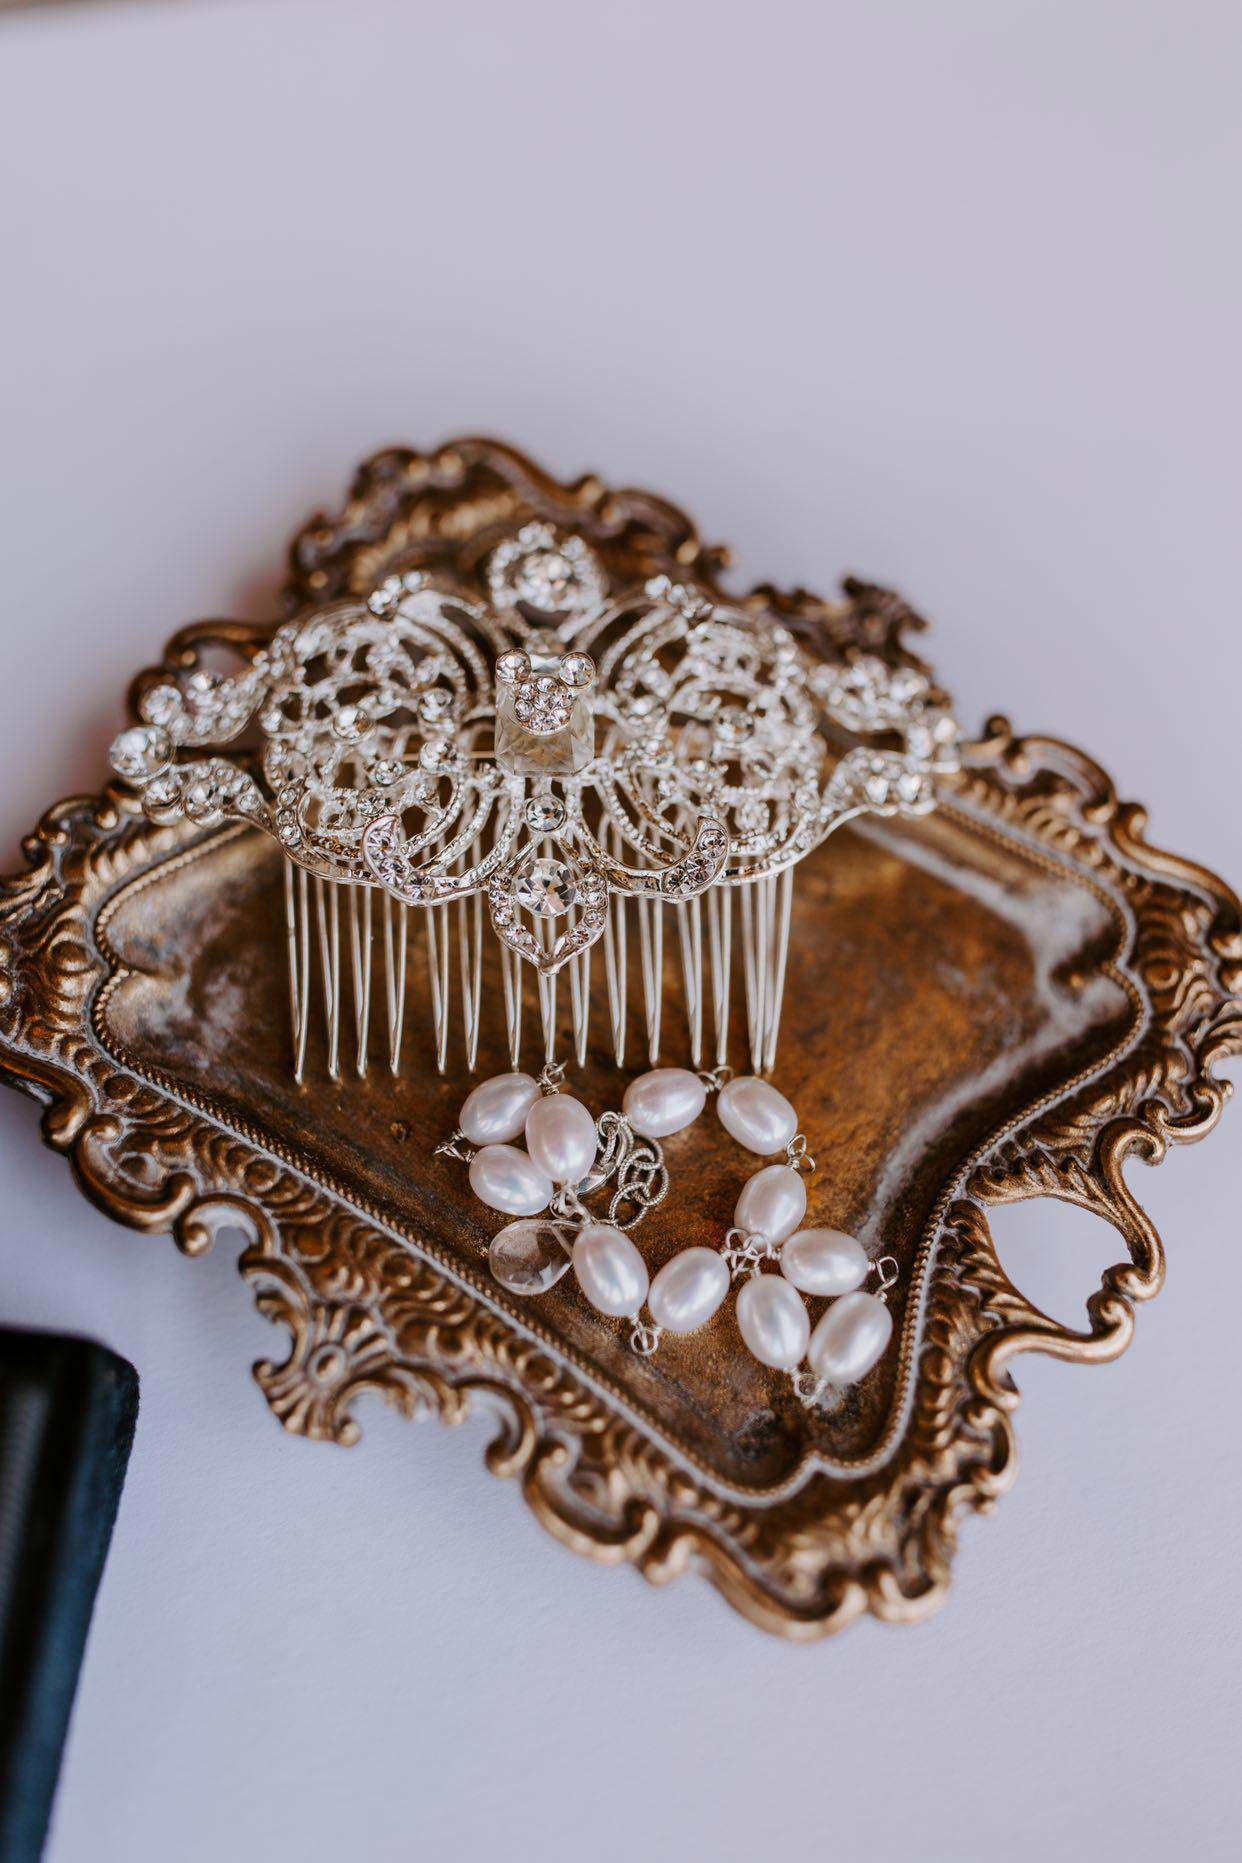 Handcrafted pearl bridal bracelet shown with antique hair comb